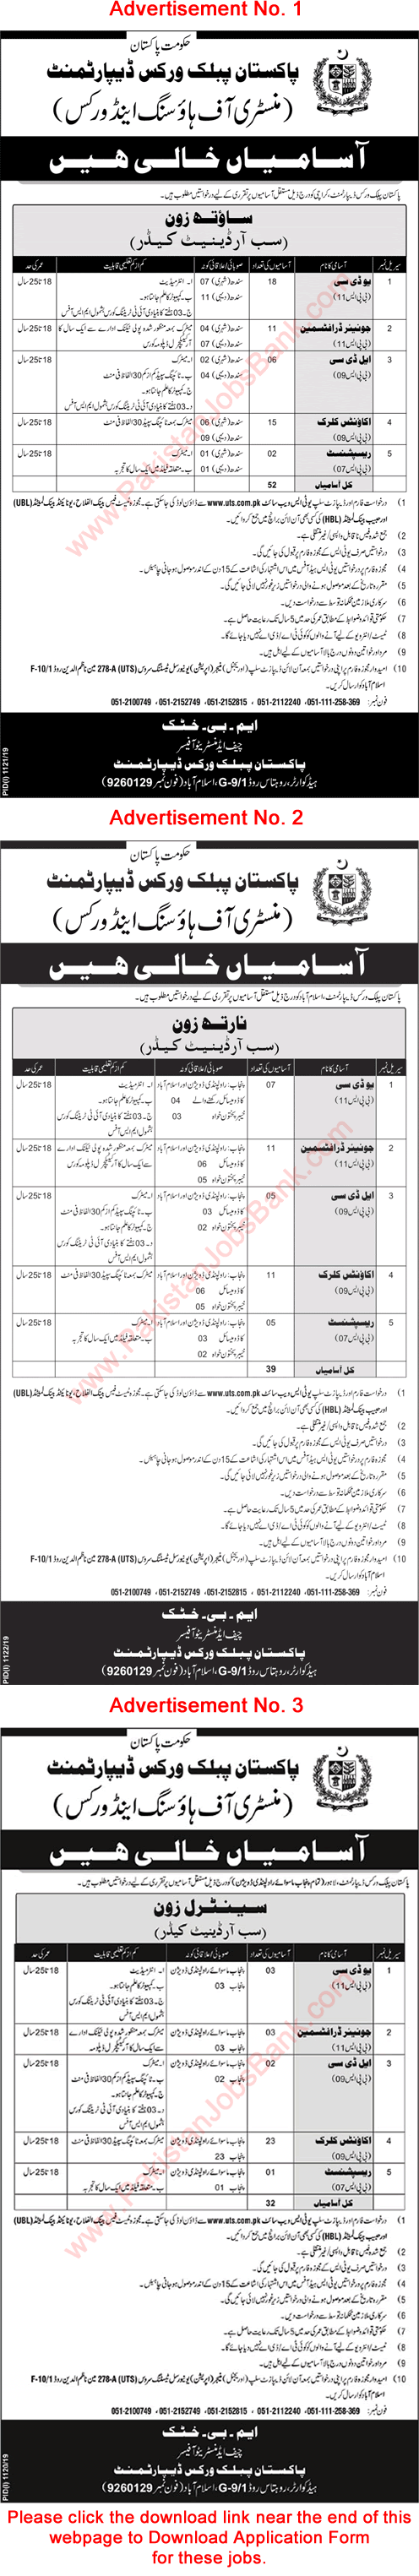 Pakistan Public Works Department Jobs September 2019 UTS Application Form Clerks & Others Latest